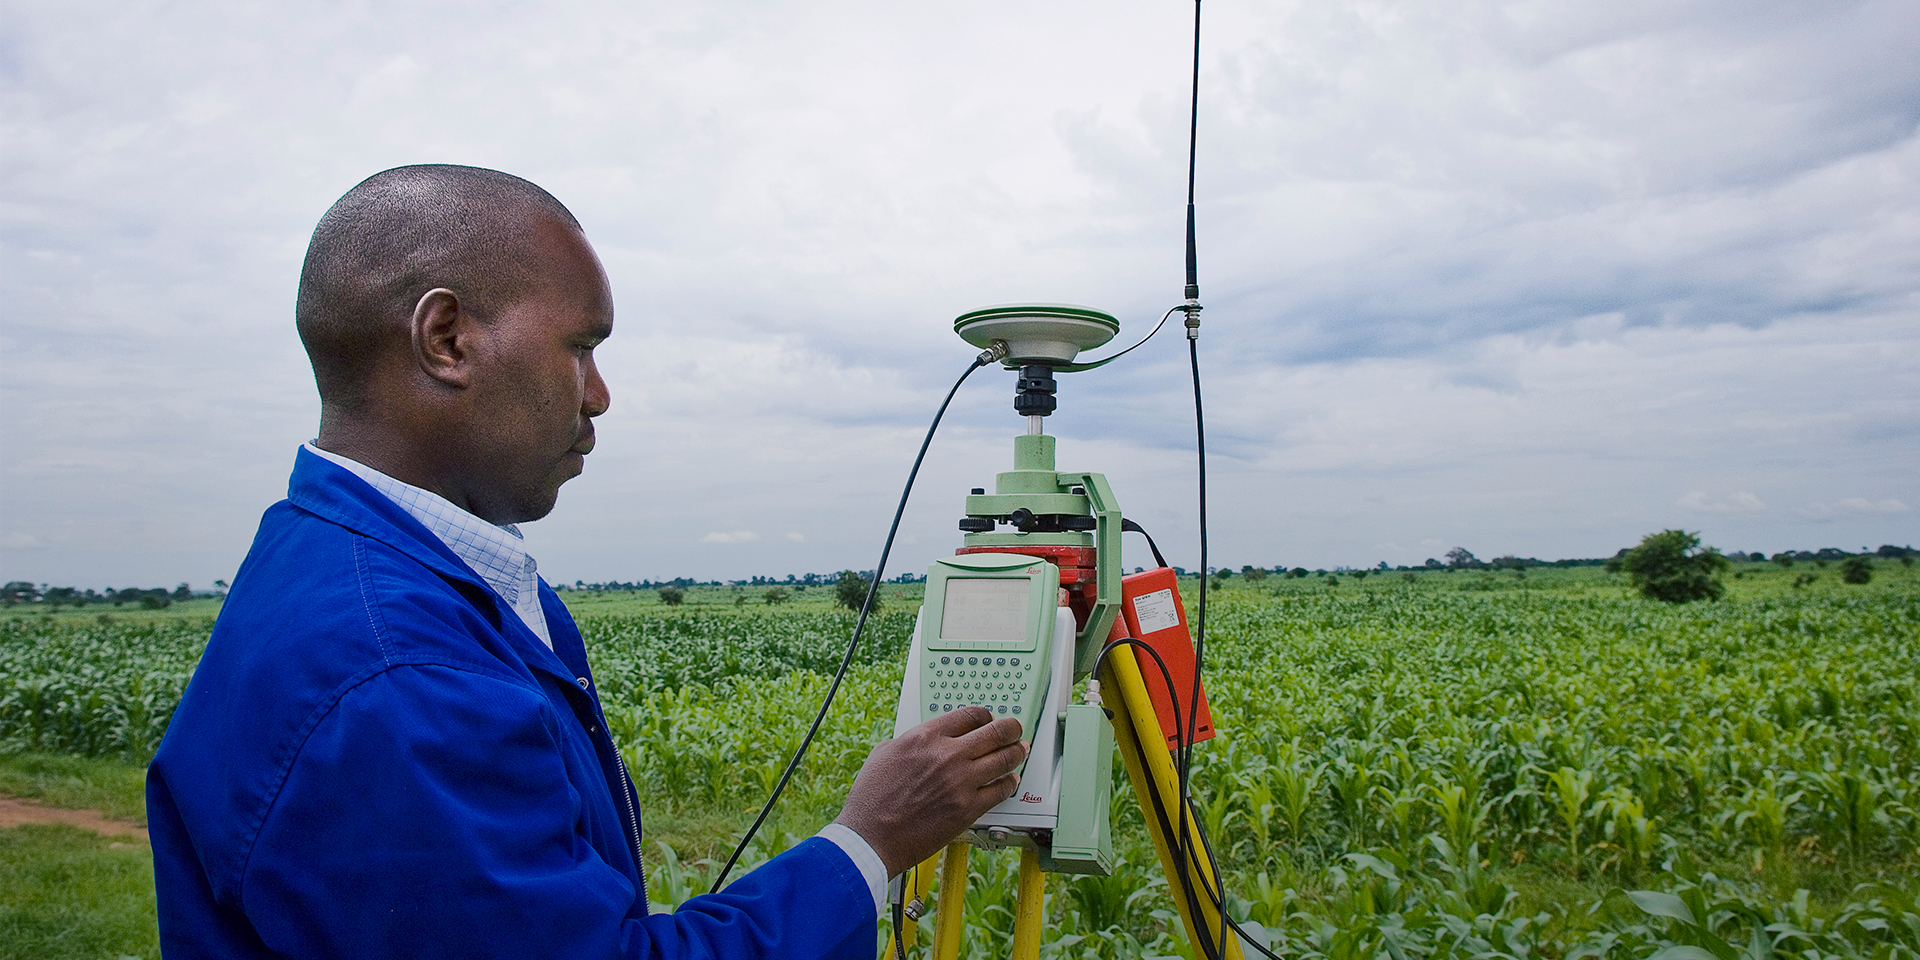 A man standing in farmland and using a keypad on a satellite device on a tripod.